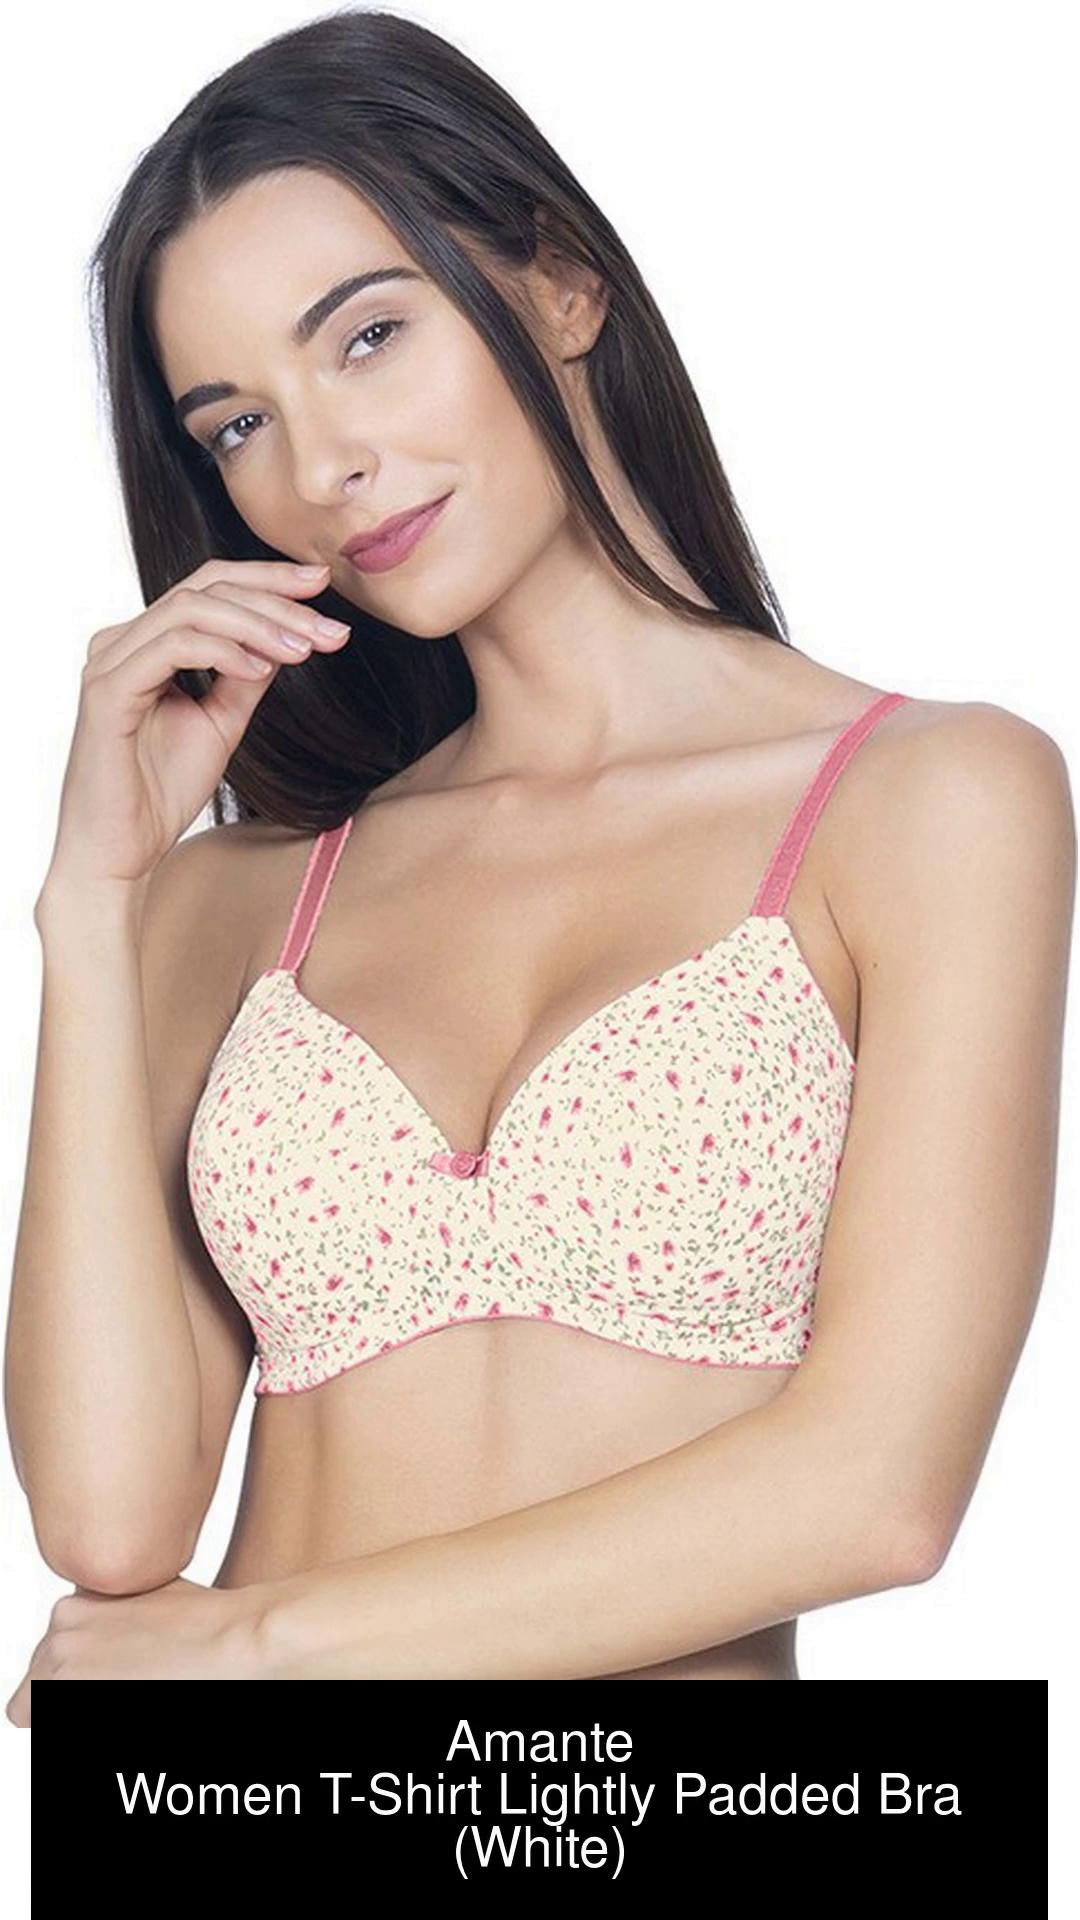 Amante 32D Nude T-Shirt Bra Price Starting From Rs 820